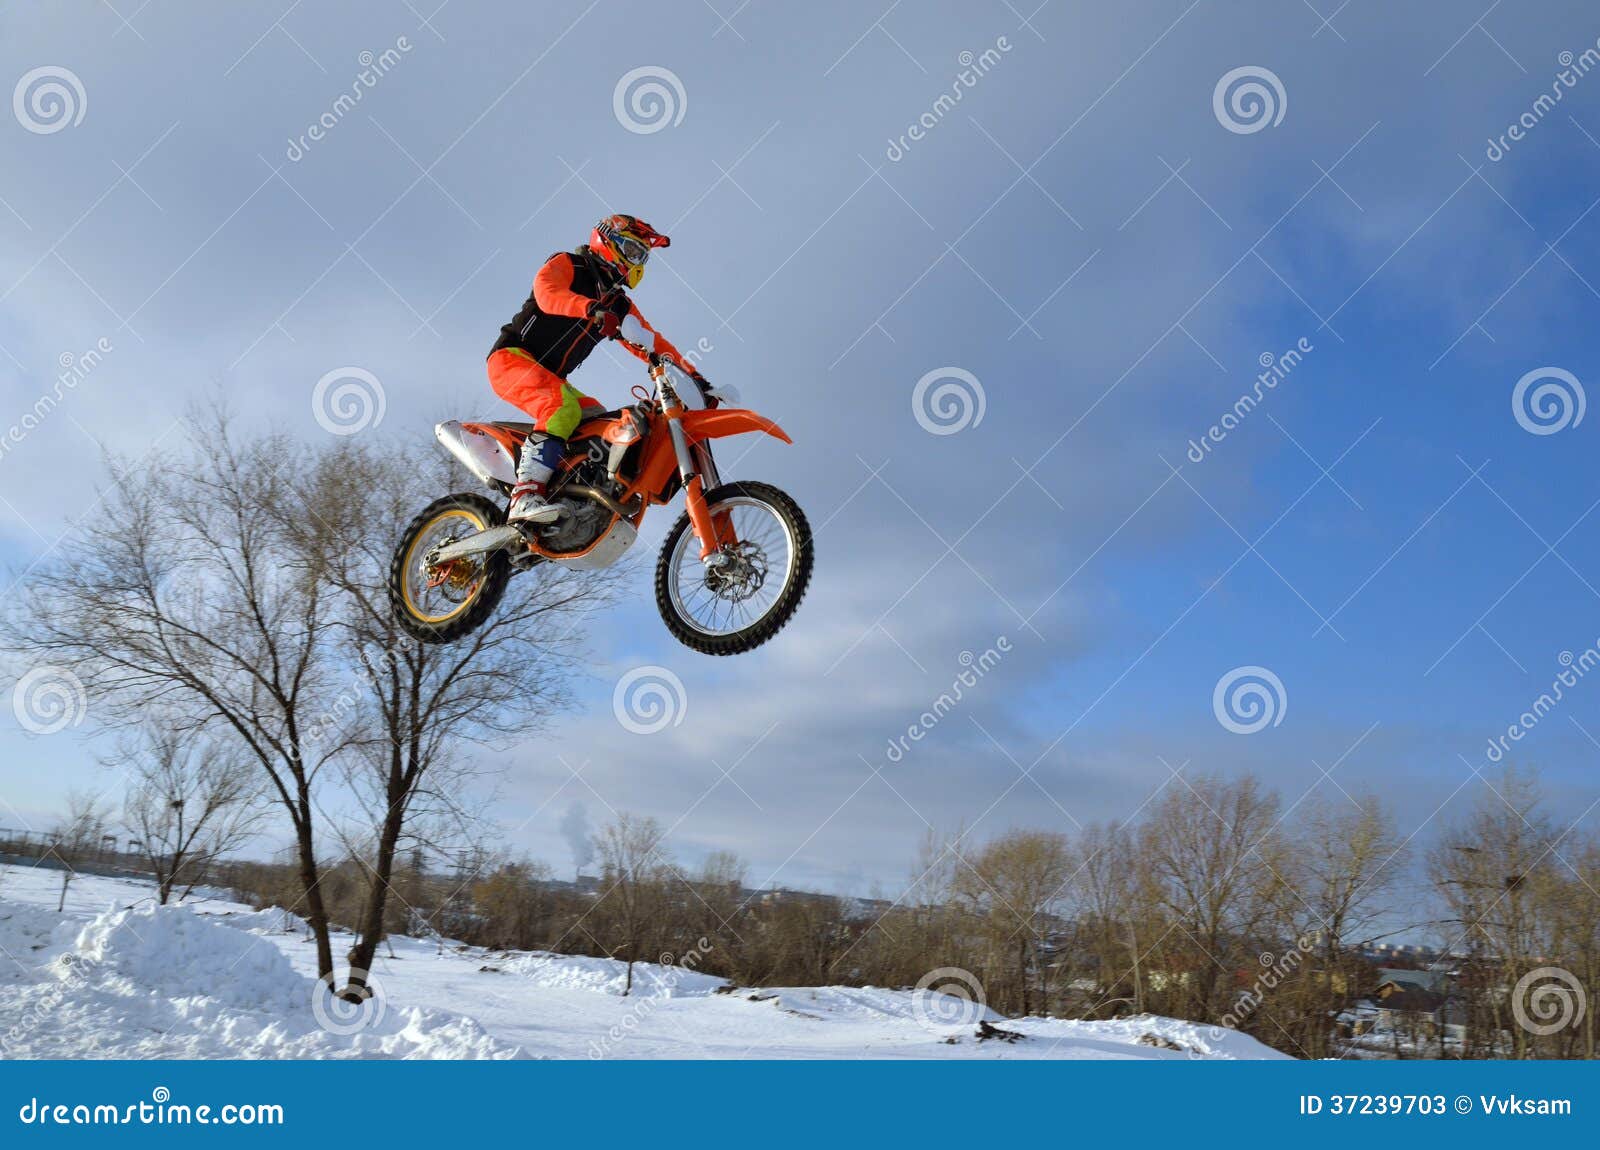 5,117 Flying Motorcycle Stock Photos